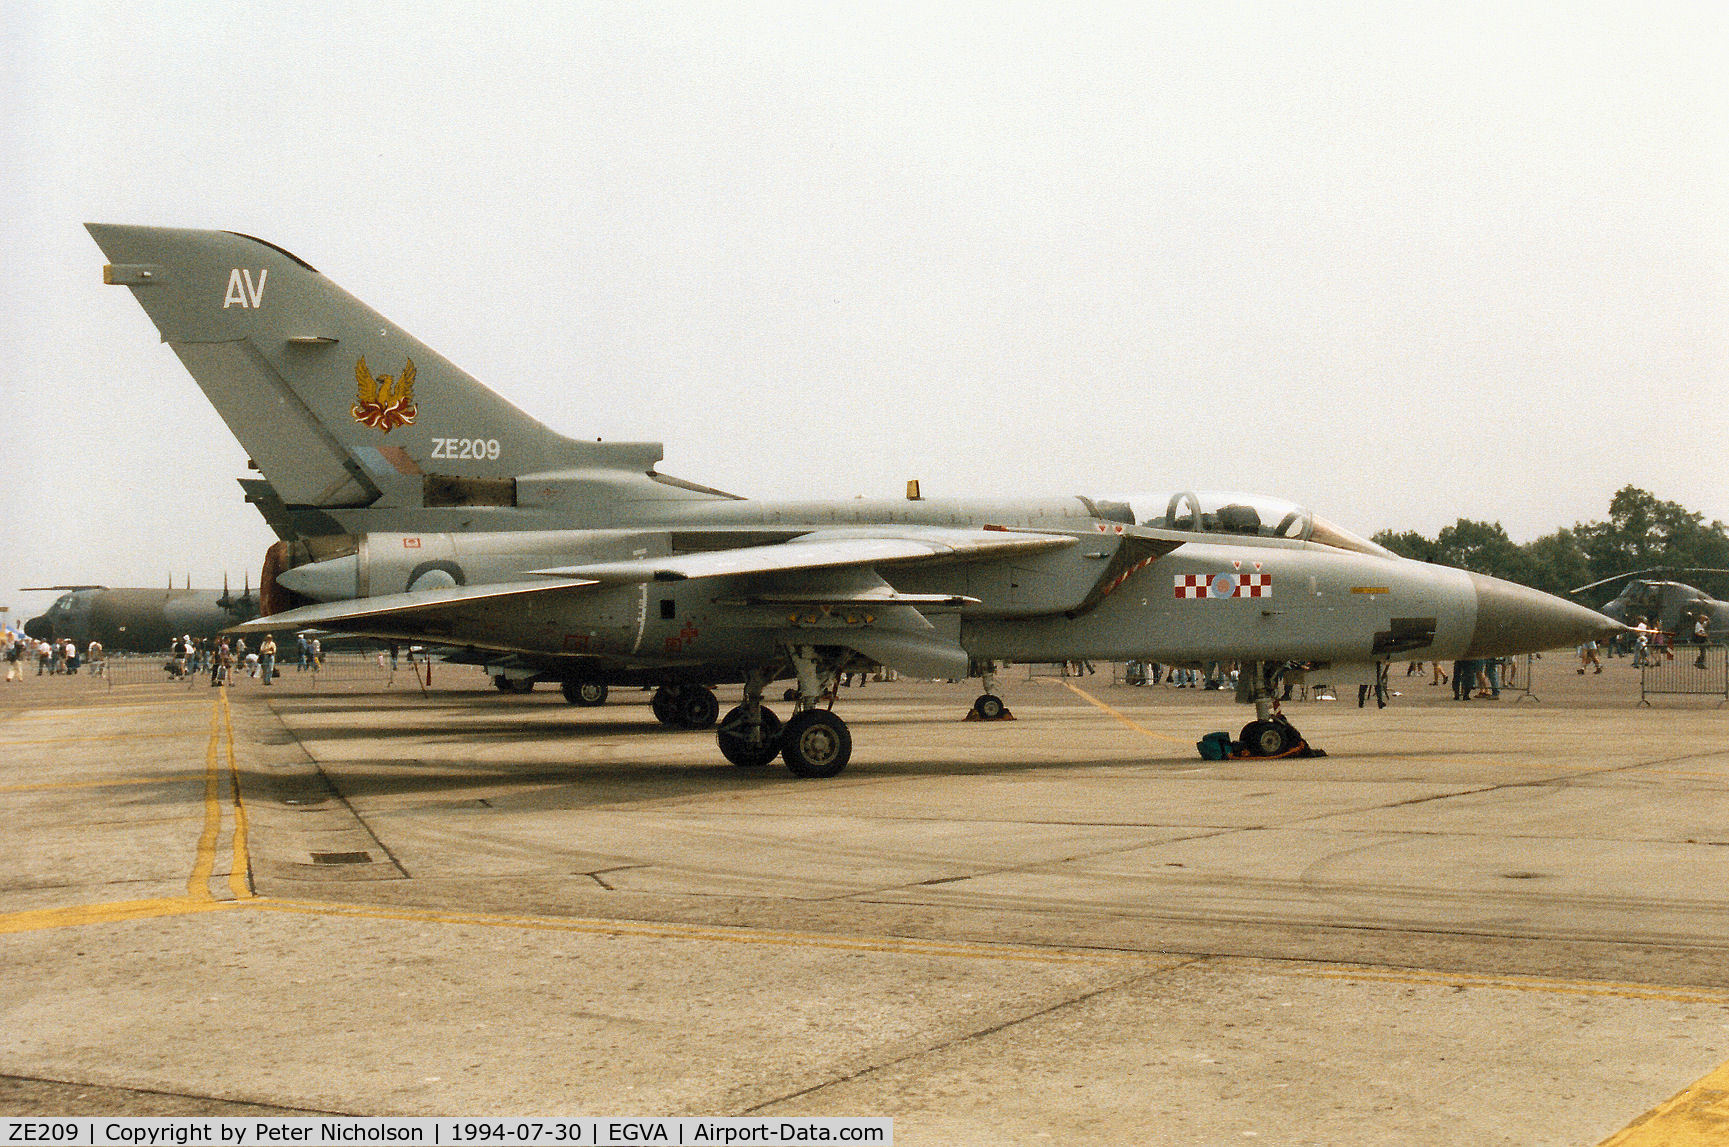 ZE209, 1987 Panavia Tornado F.3 C/N AS027/583/3261, Tornado F.3, callsign Phoenix 4, of 56[Reserve] Squadron at RAF Coningsby on display at the 1994 Intnl Air Tattoo at RAF Fairford.